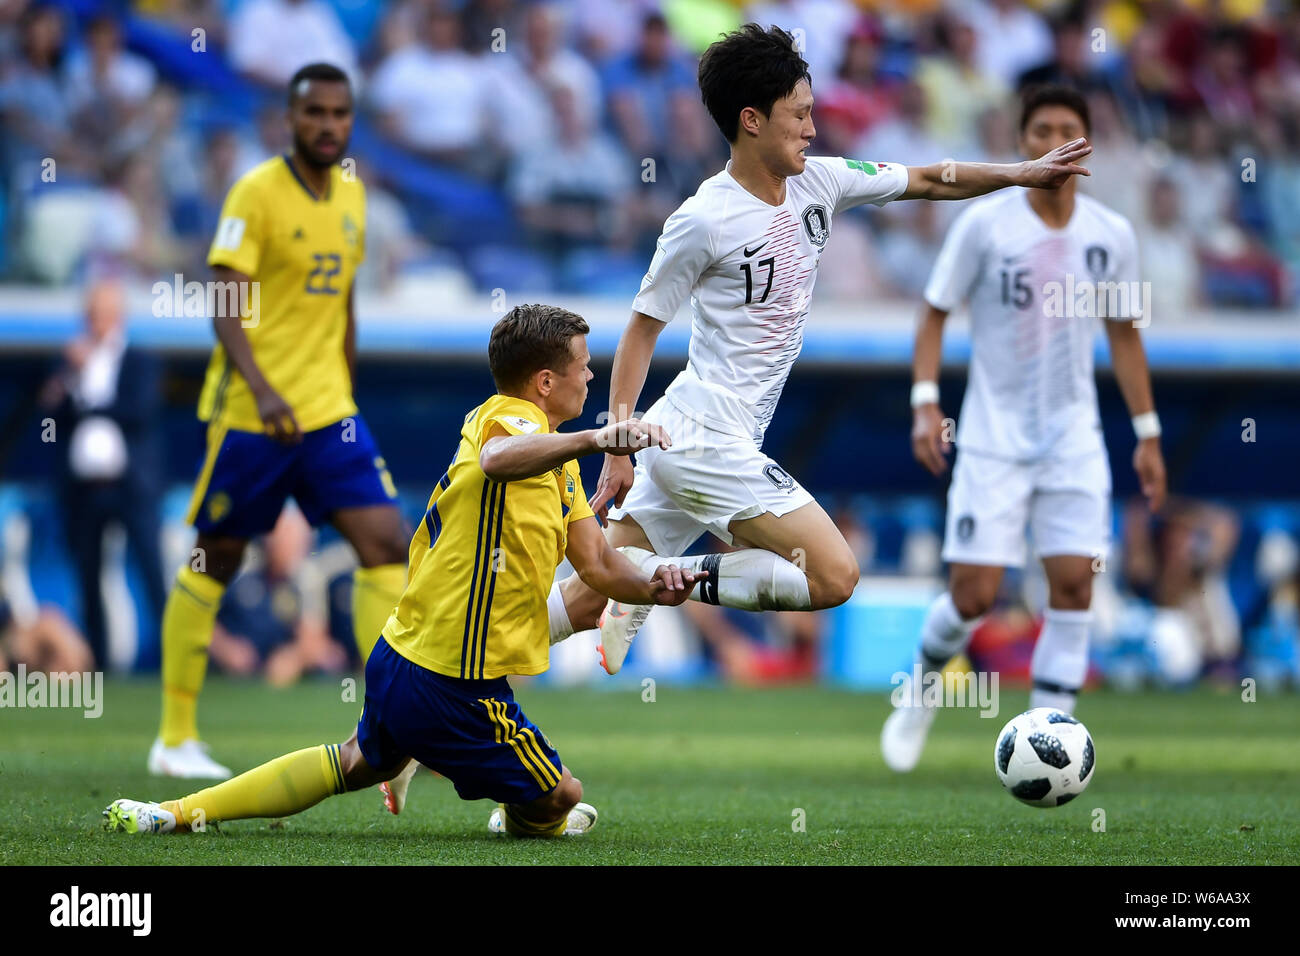 Viktor Claesson of Sweden, left, challenges Lee Jae-sung of South Korea in their Group F match during the FIFA World Cup 2018 in Nizhny Novgorod, Russ Stock Photo